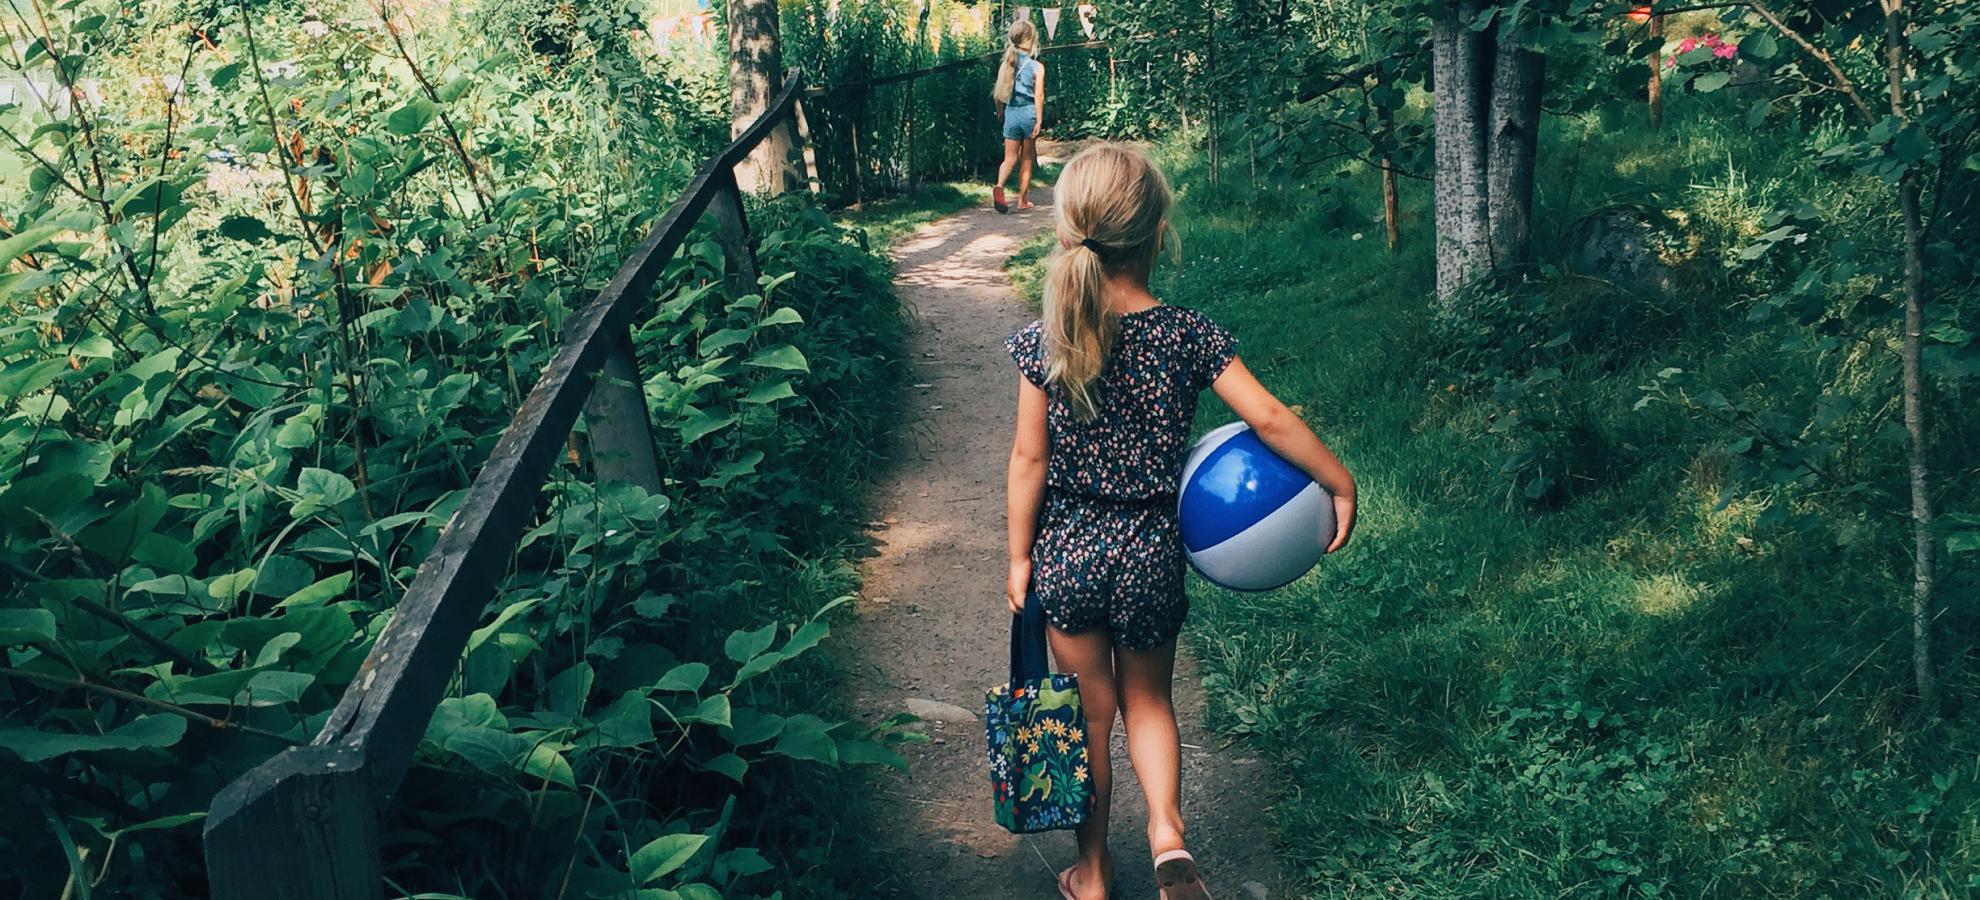 Facing away from the camera, a little girl carrying a beach ball under one arm and a bag in her opposite hand, walks down a trail that is surrounded by grass, bushes and trees.